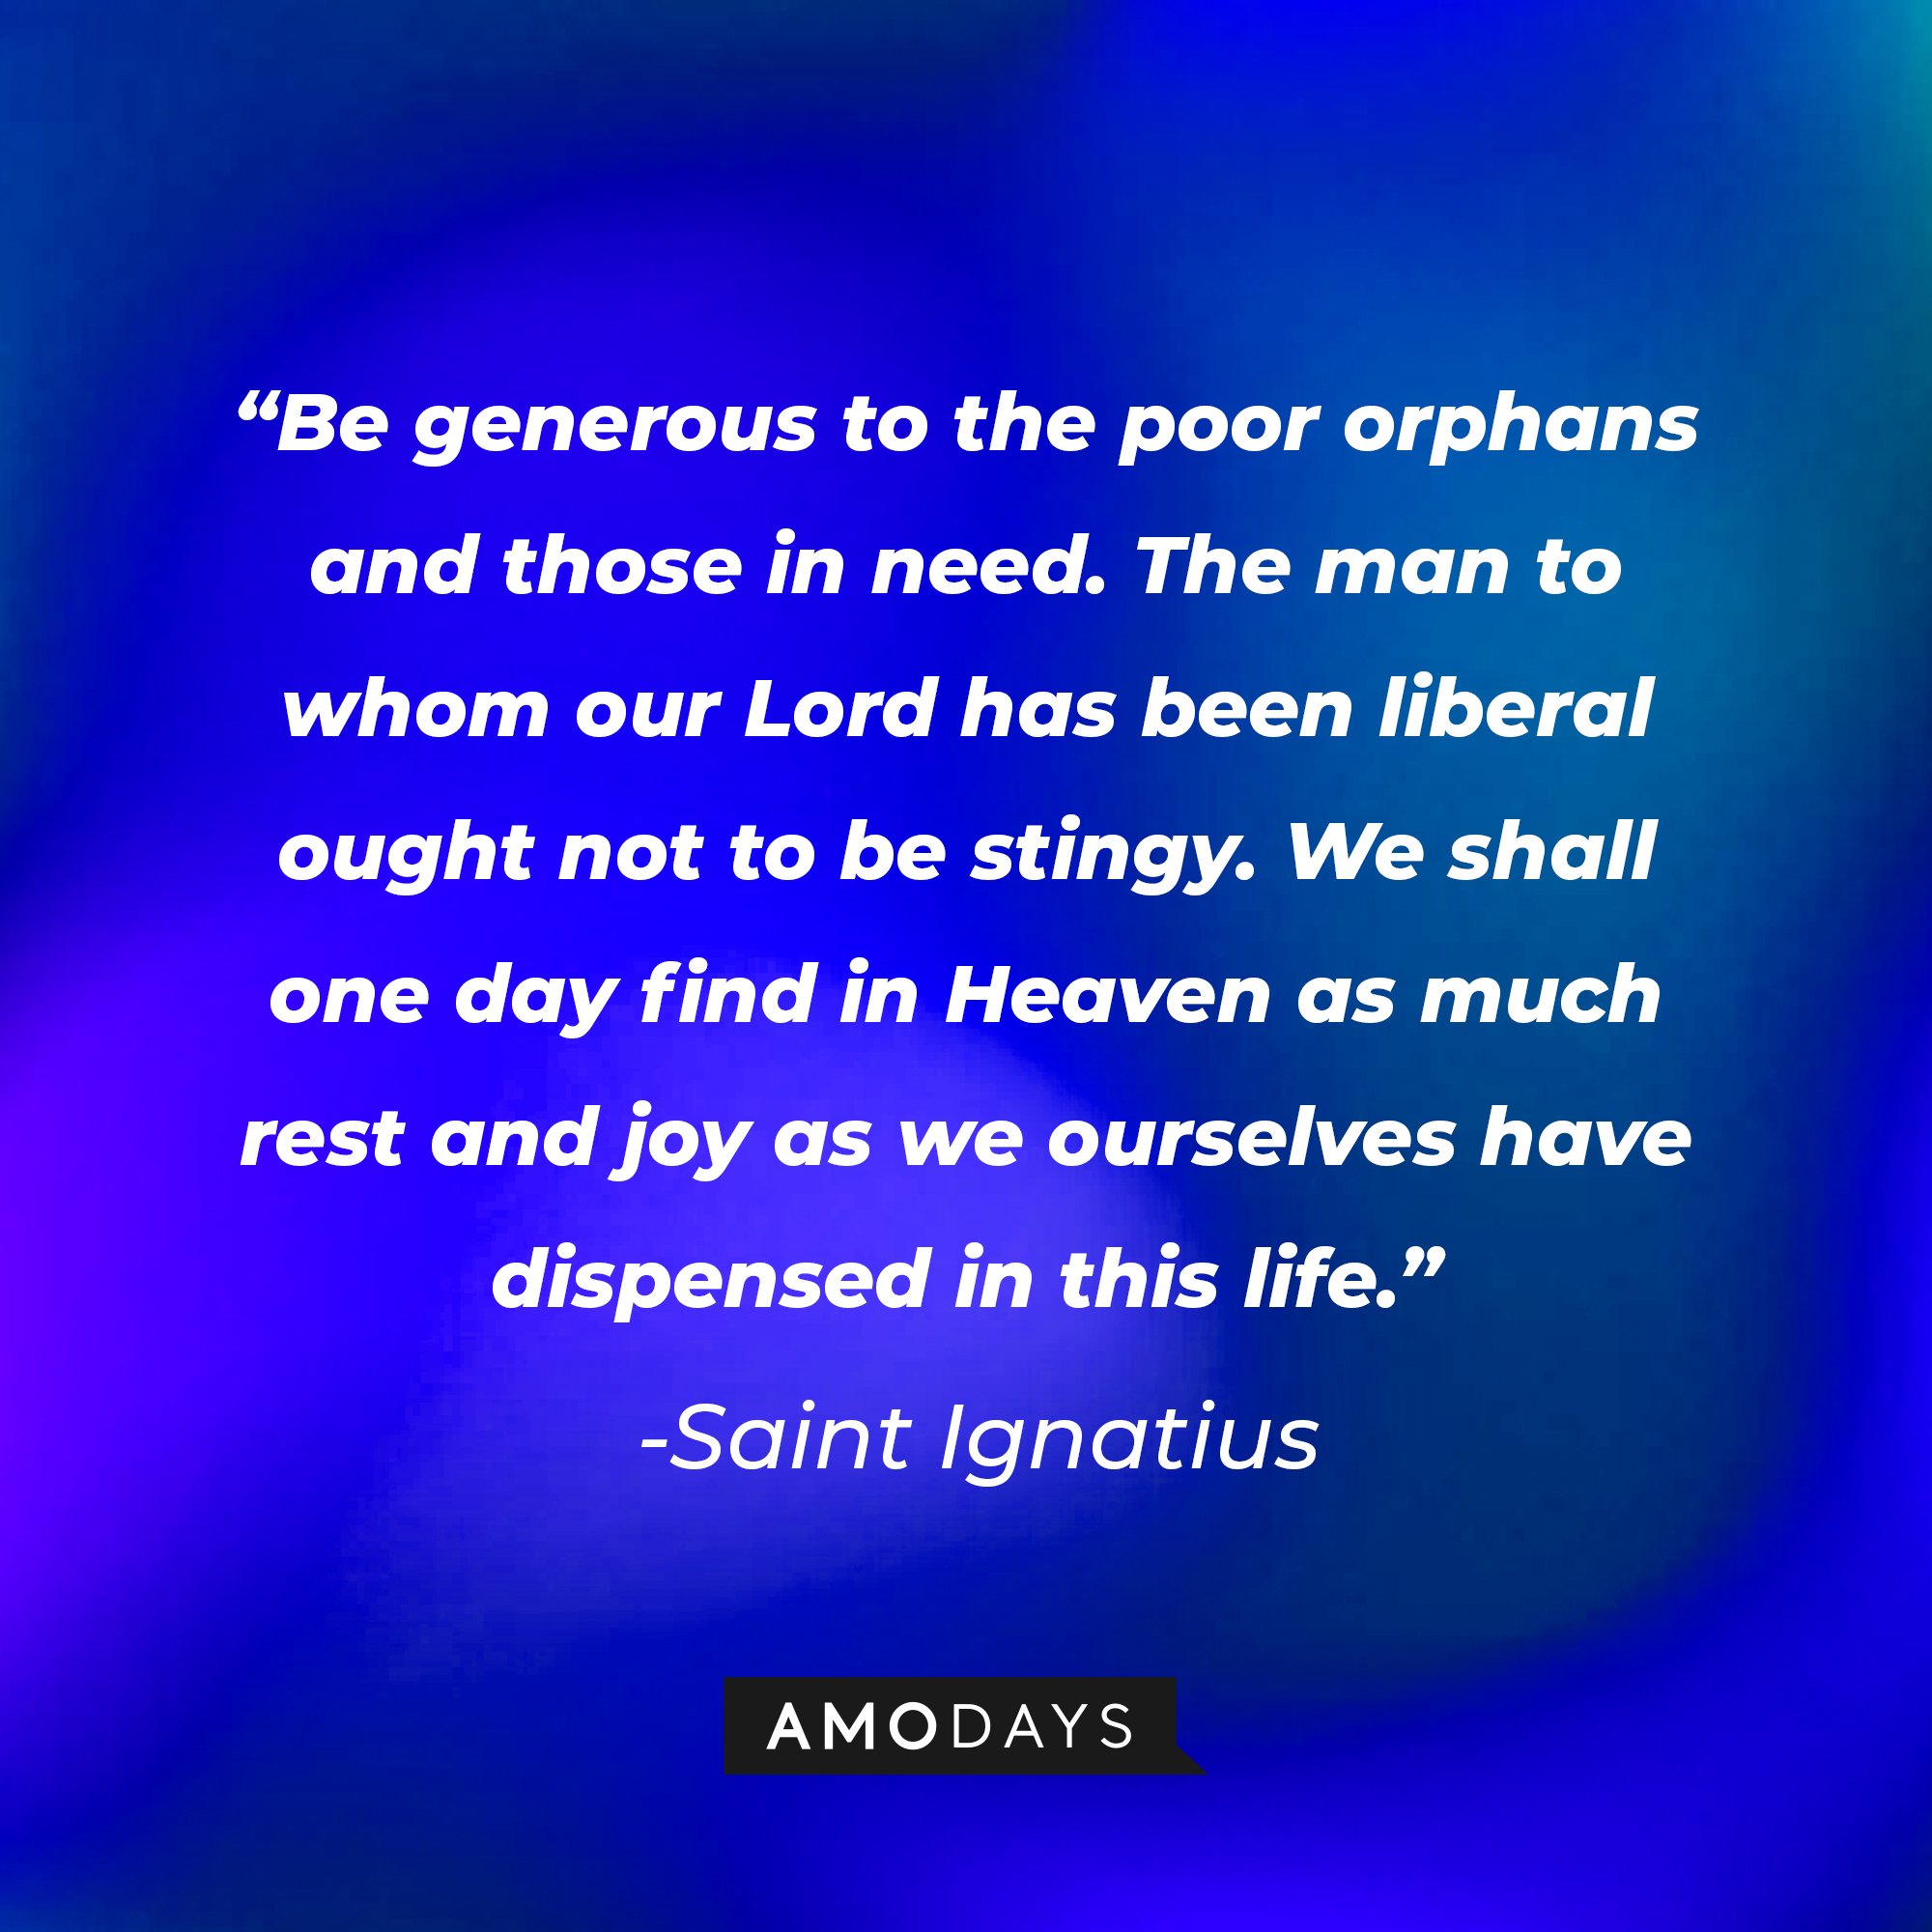 Saint Ignatius' quote: "Be generous to the poor orphans and those in need. The man to whom our Lord has been liberal ought not to be stingy. We shall one day find in Heaven as much rest and joy as we ourselves have dispensed in this life." | Image: AmoDays